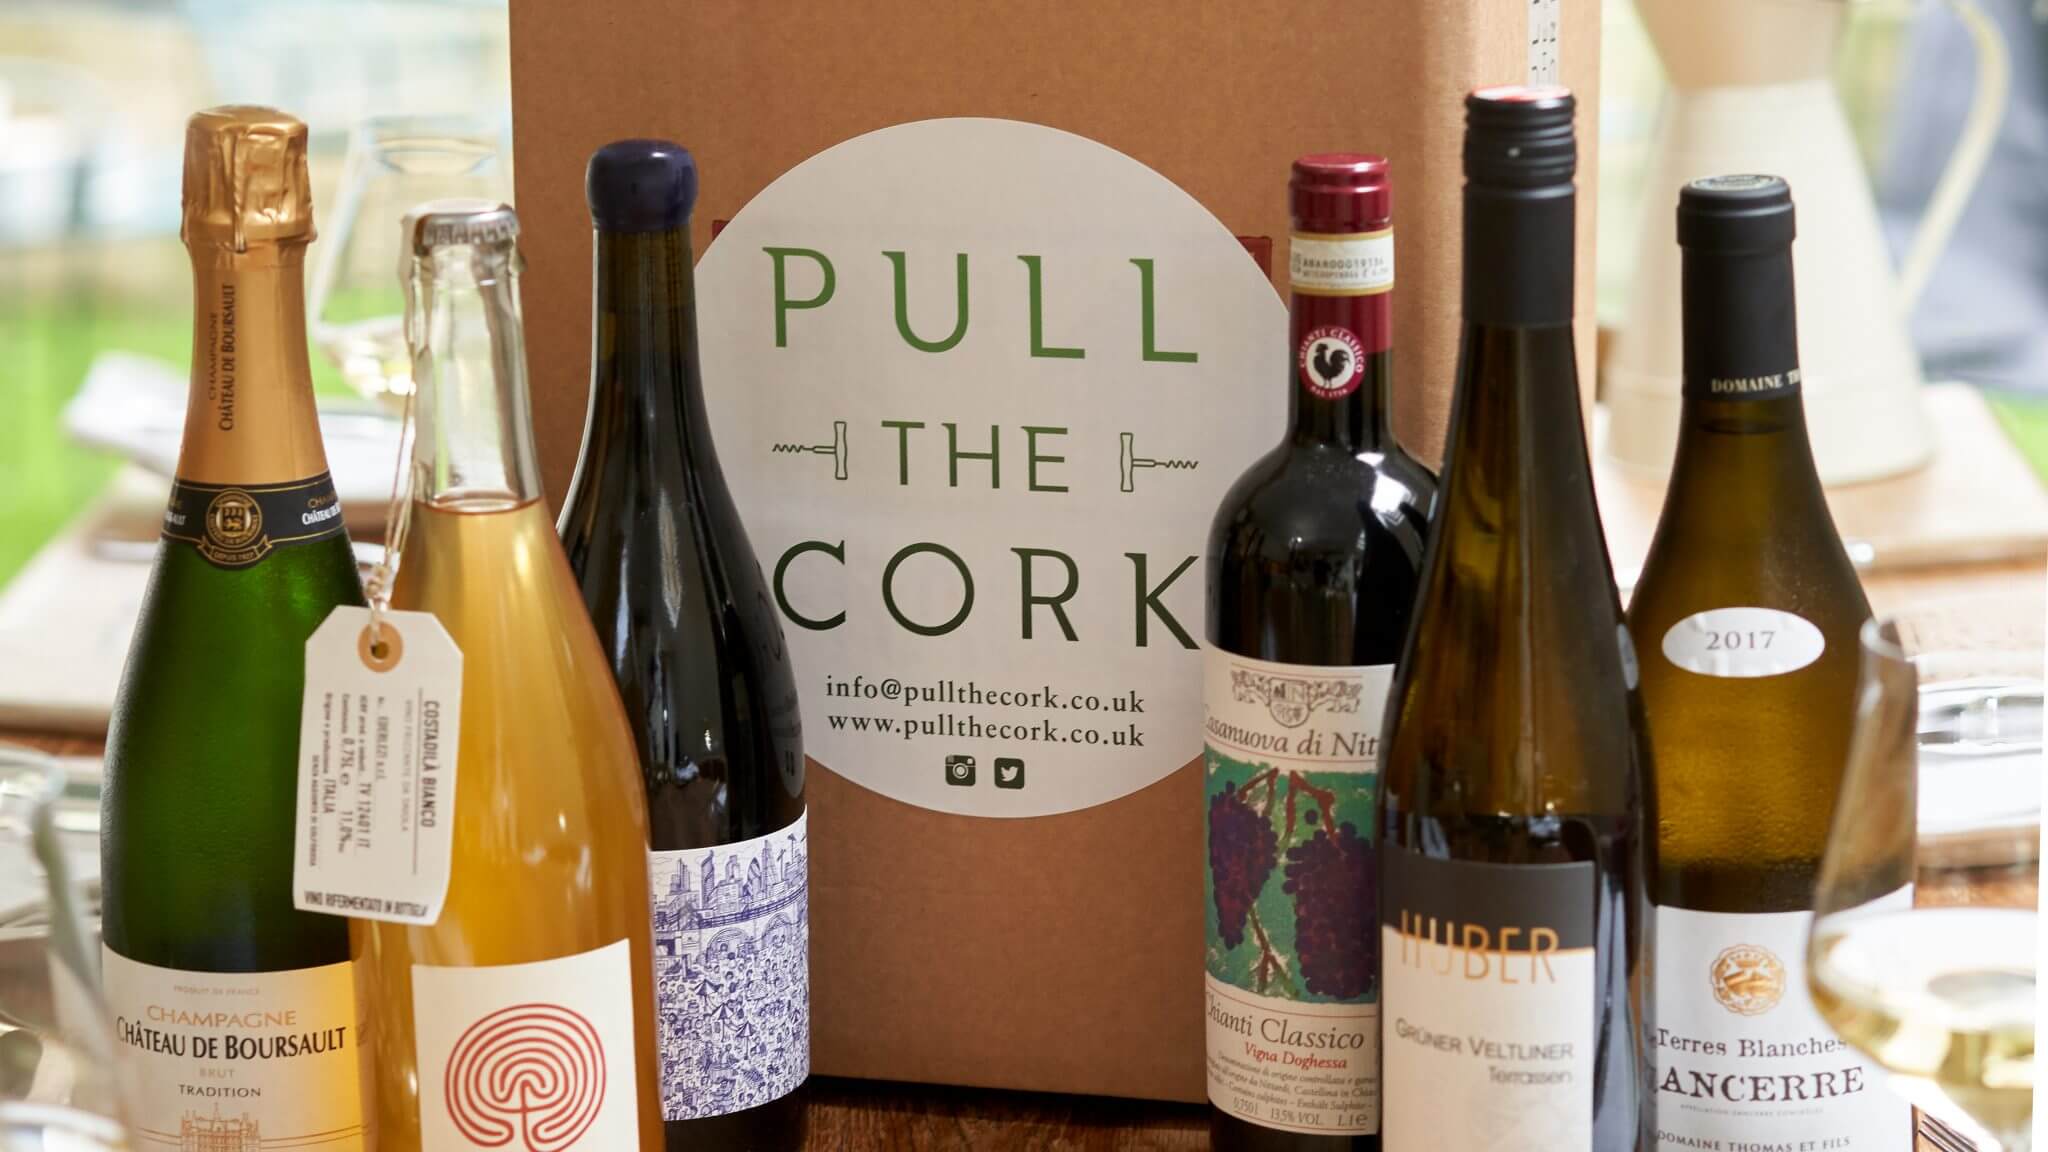 Black Friday Wine Deals on Pull The Cork 